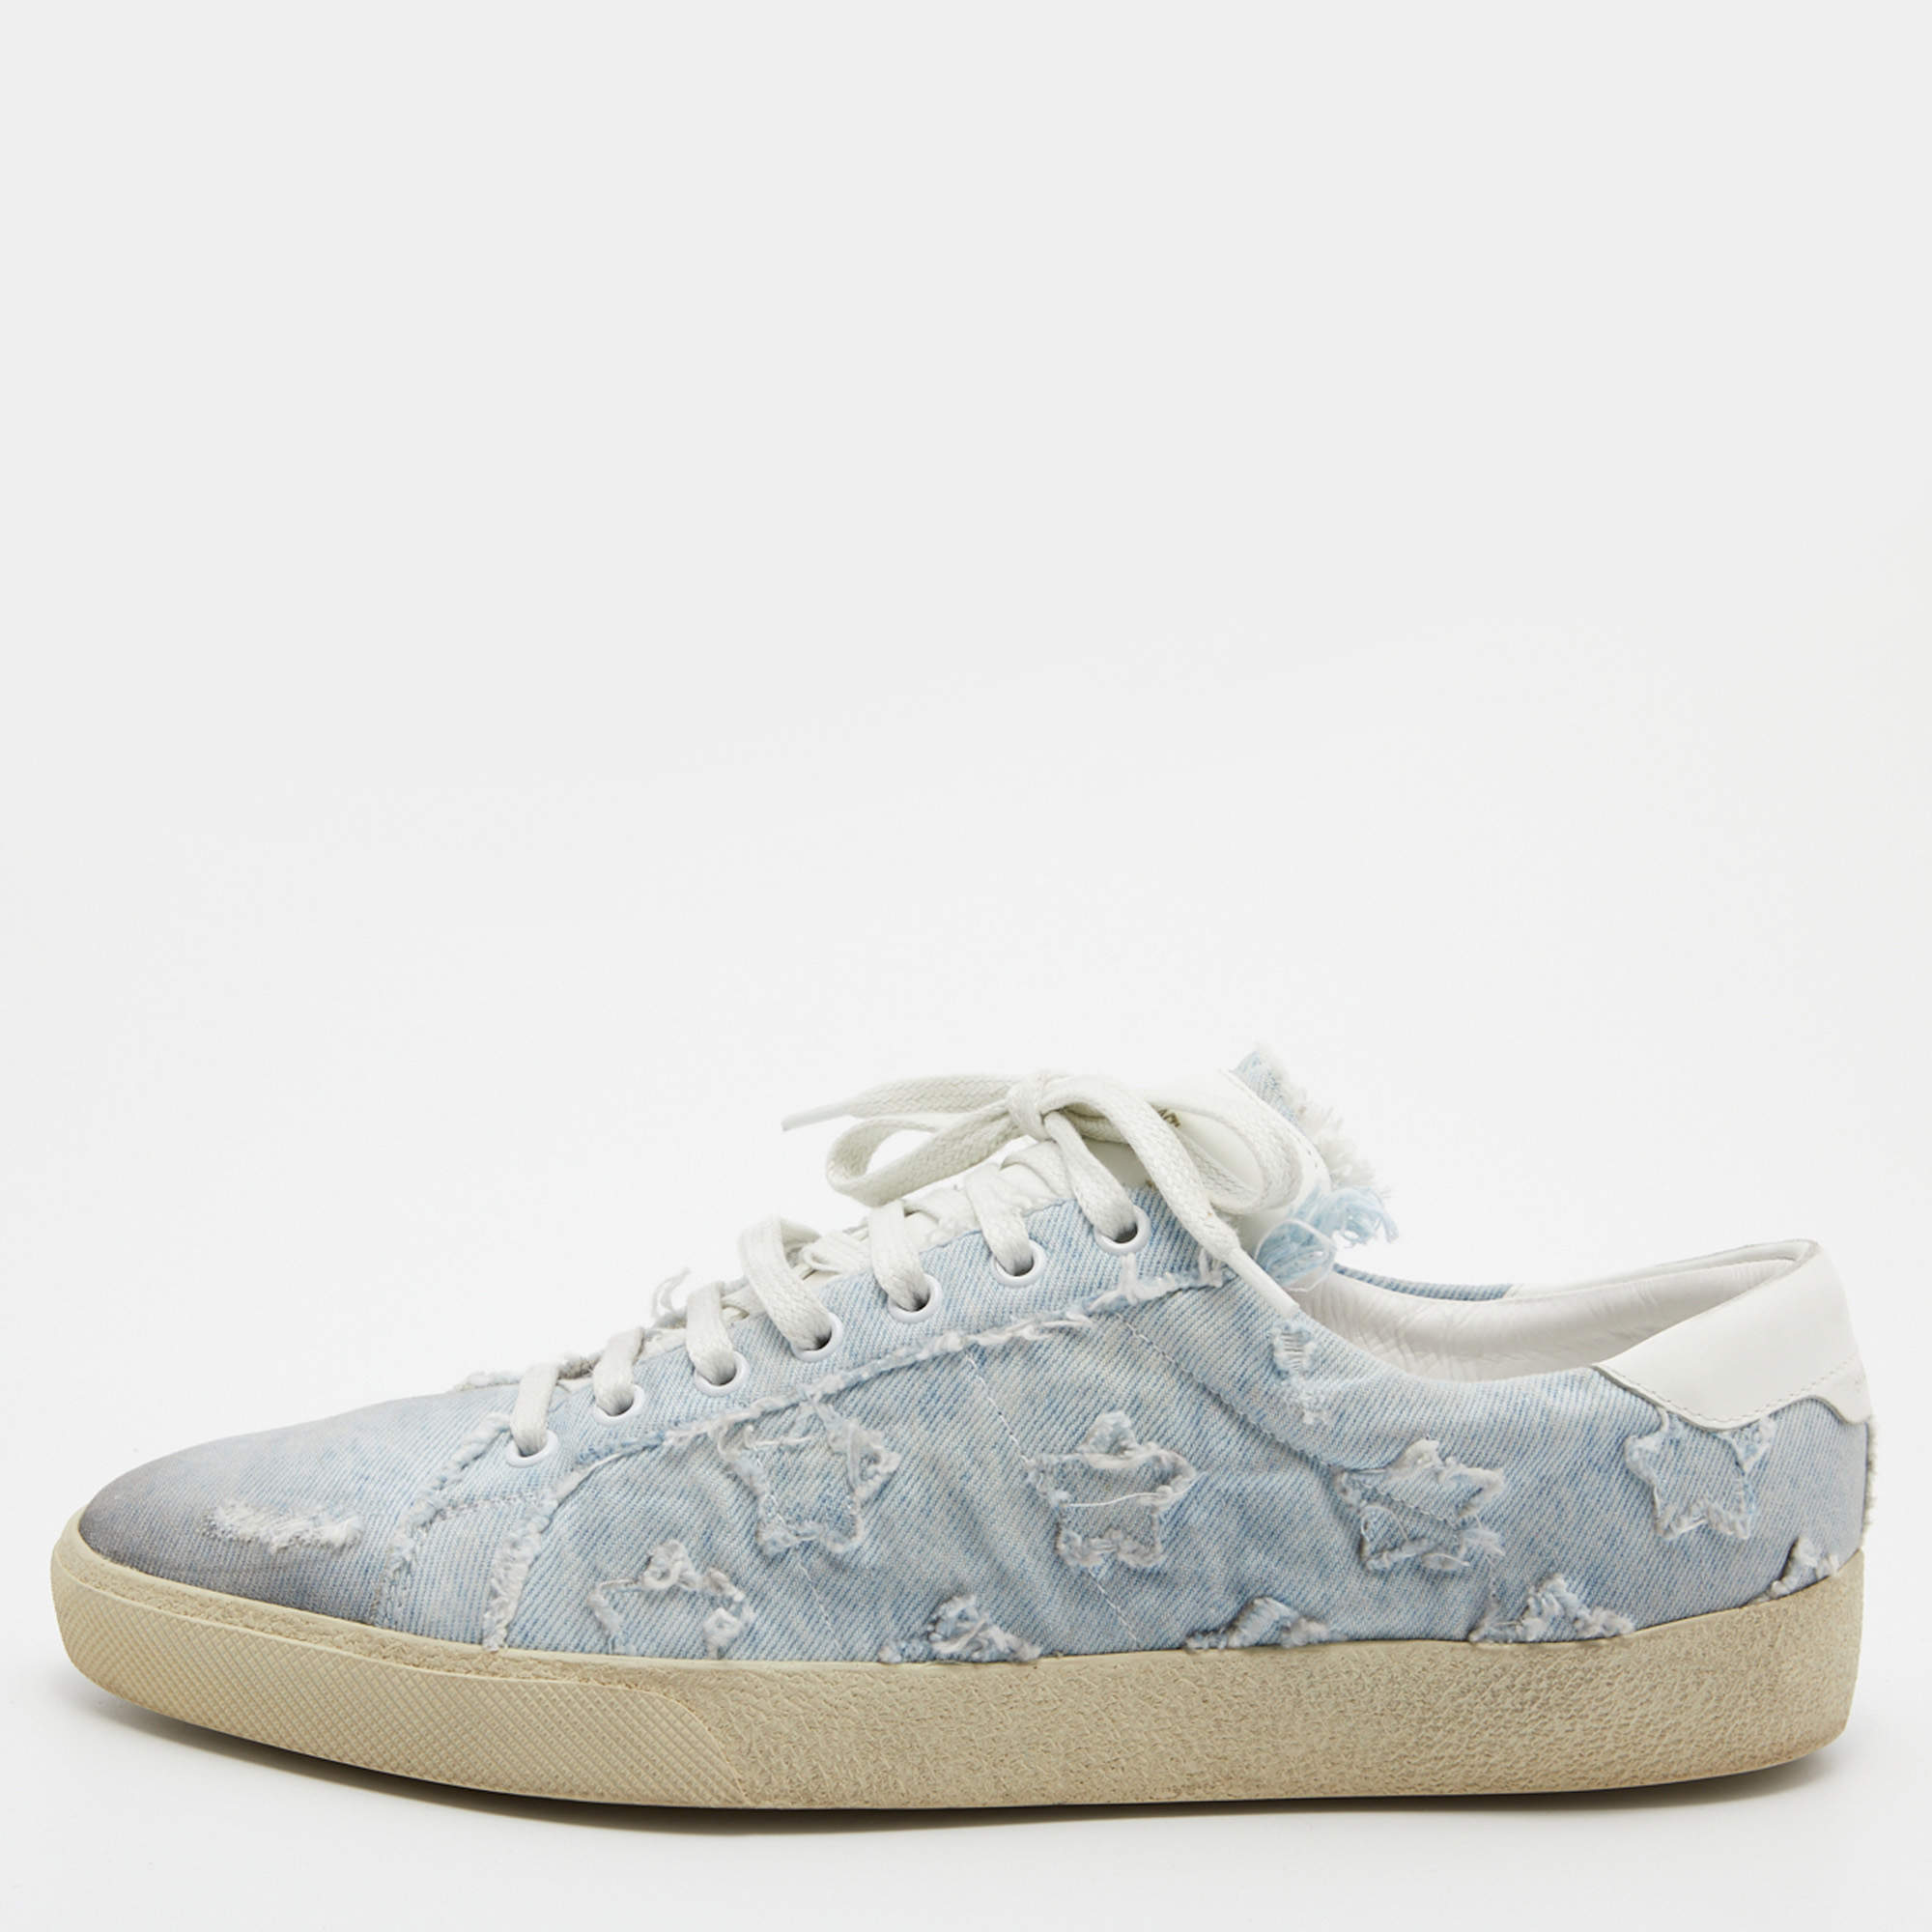 Saint Laurent Blue/White Denim and Leather Star Low Top Sneakers Size 45